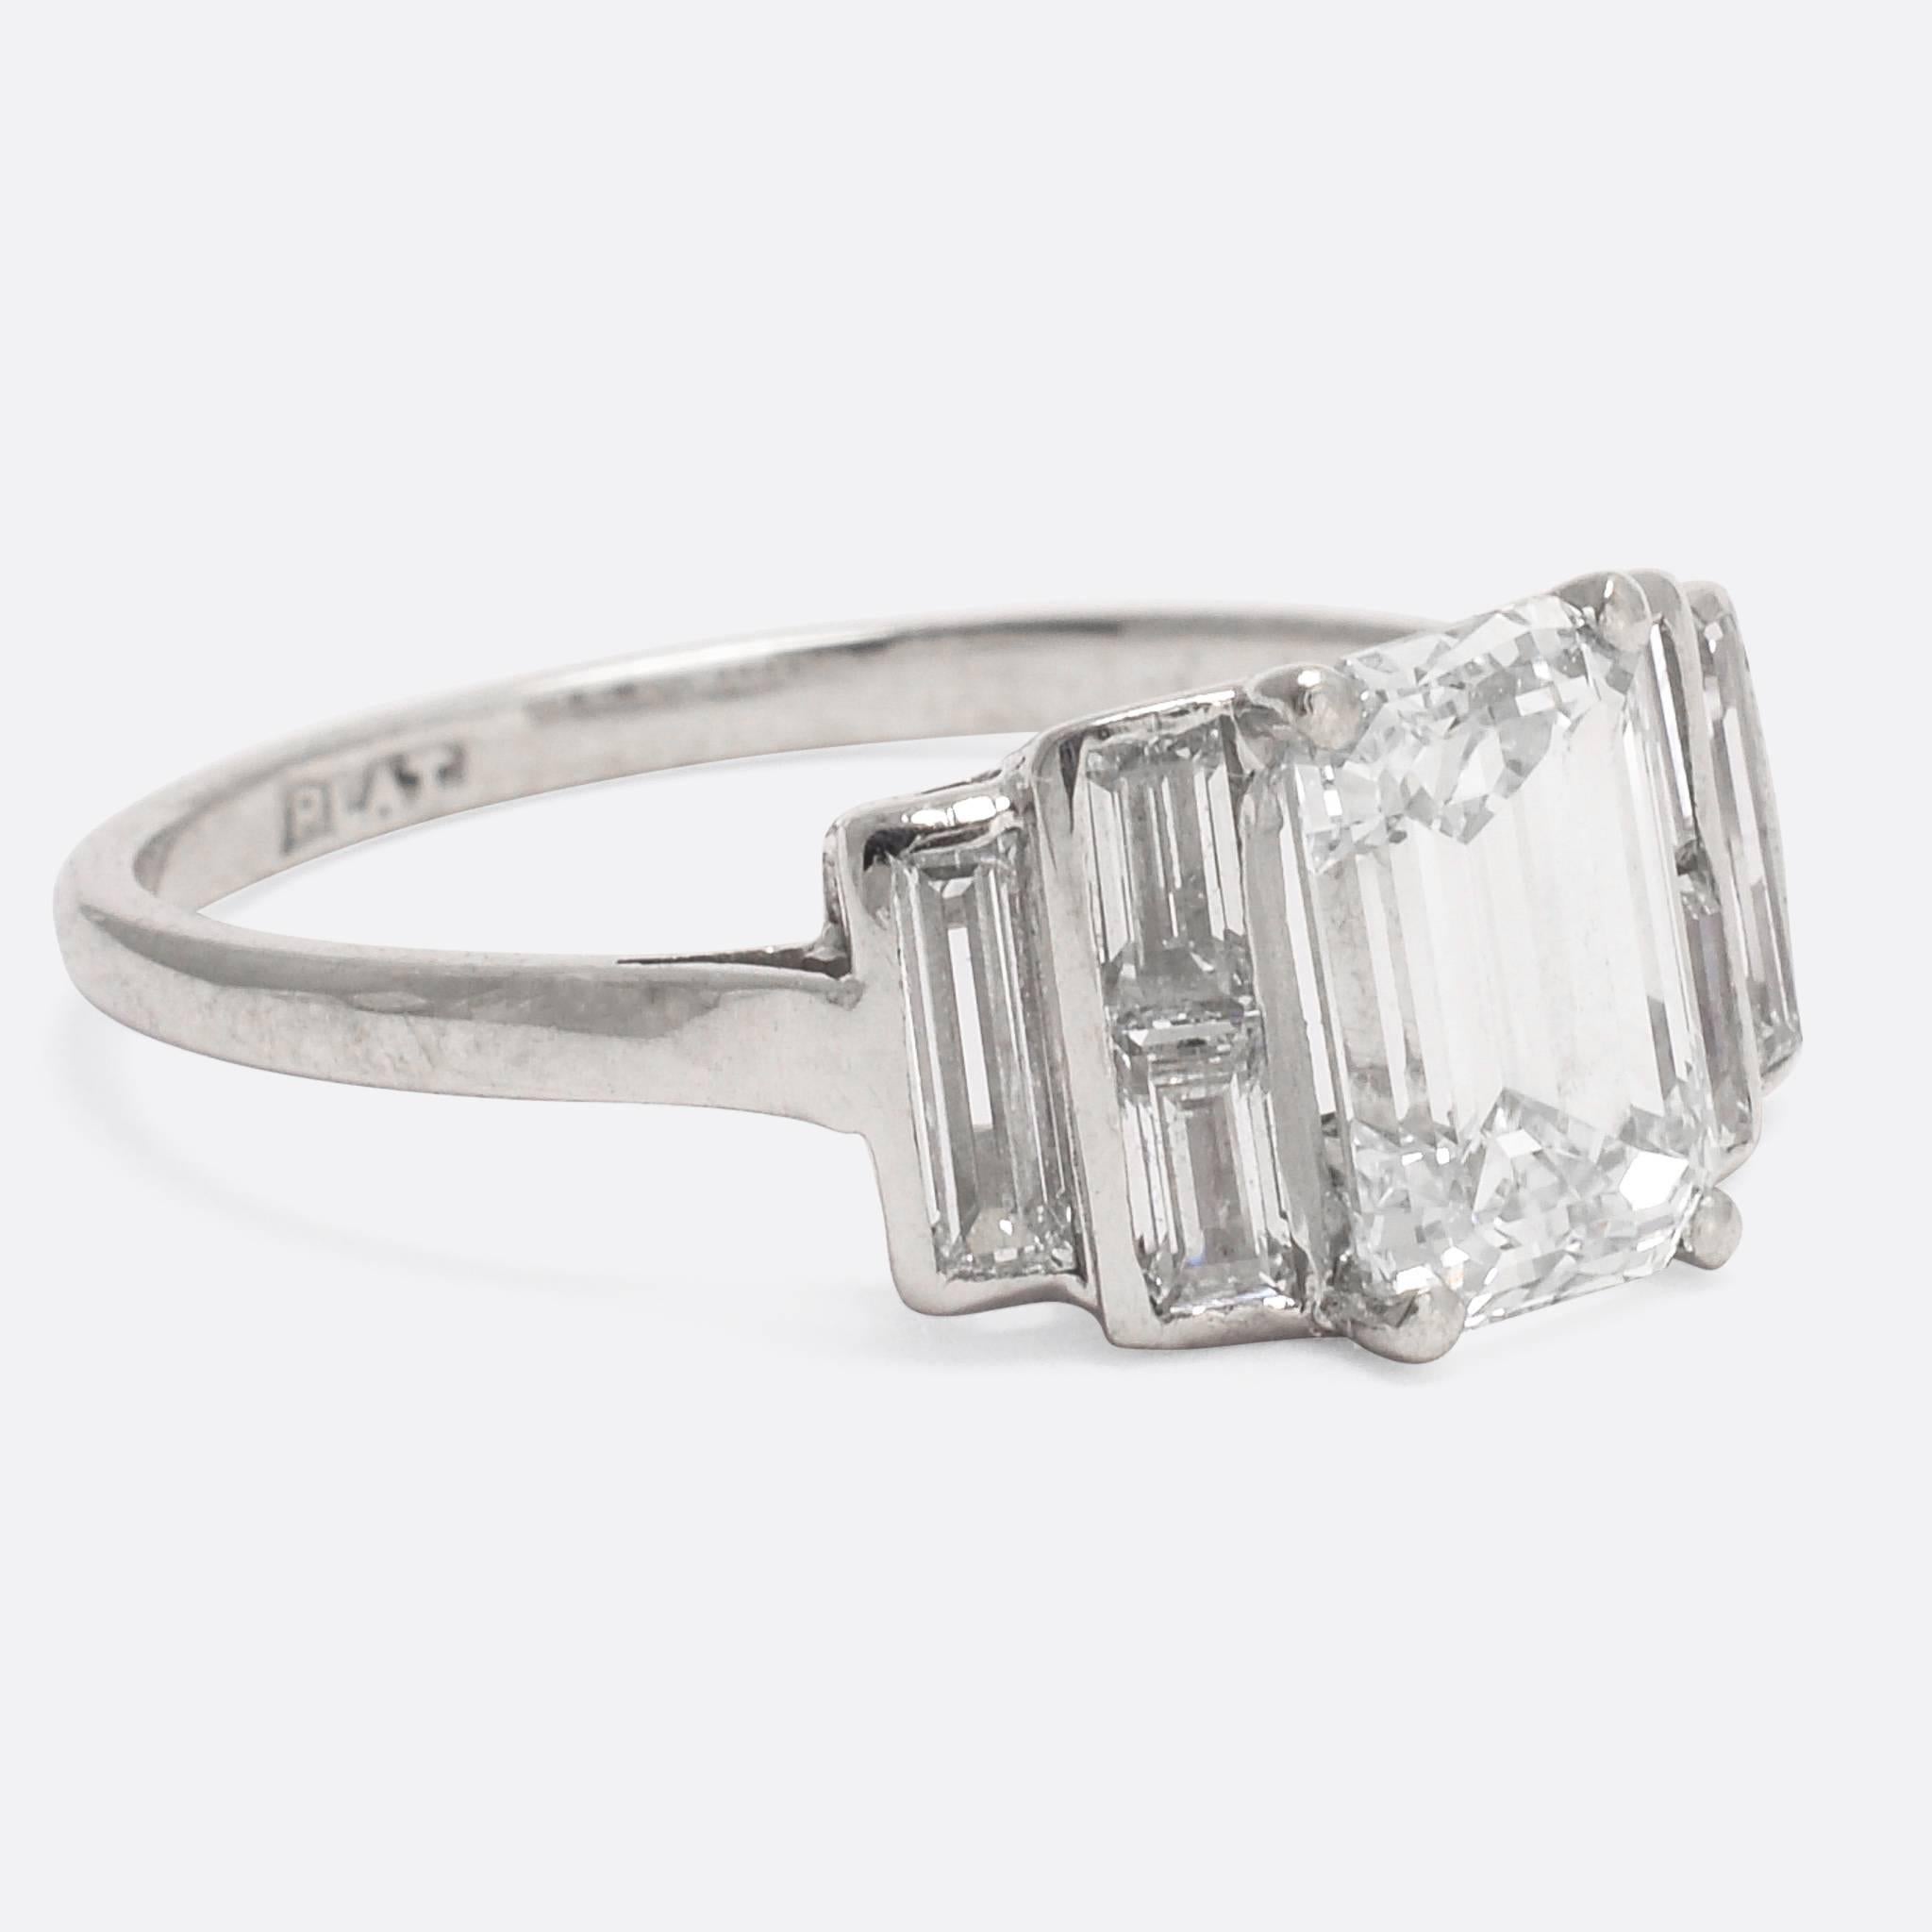 Art Deco, circa 1925
An especially cool Art Deco engagement ring dating to c.1925, the main event being a 1.35 carat emerald cut diamond (with grading certificate stating K-VS1). The stepped shoulders are set with further baguette cut diamonds; the